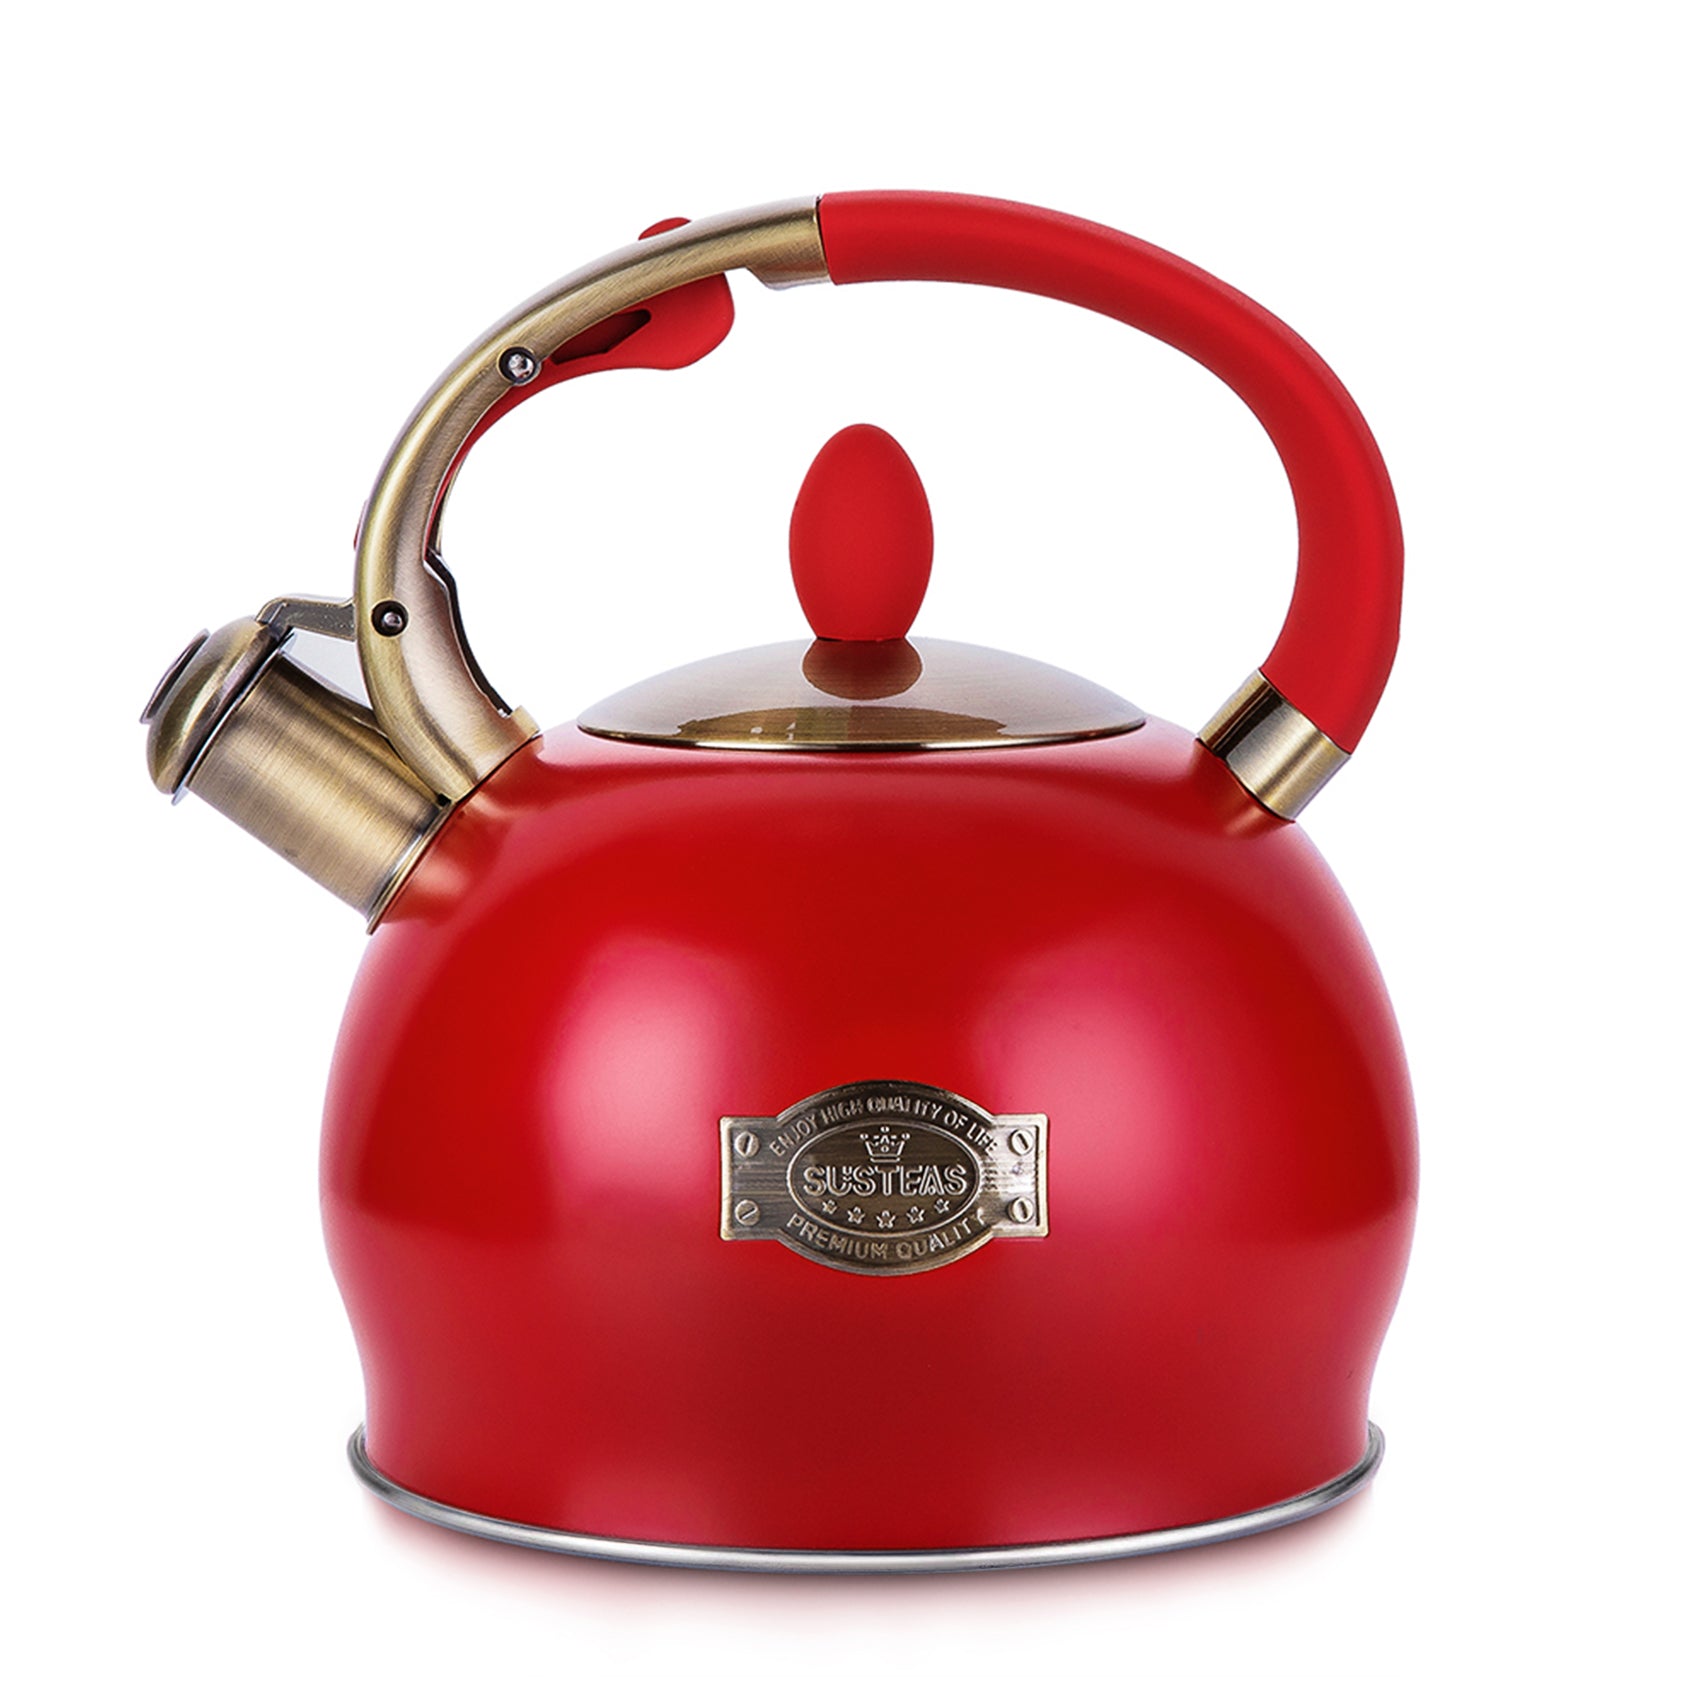 2.64 Quart Surgical Stainless Steel Stove Top Whistle Tea Kettle (Gree –  SUSTEAS